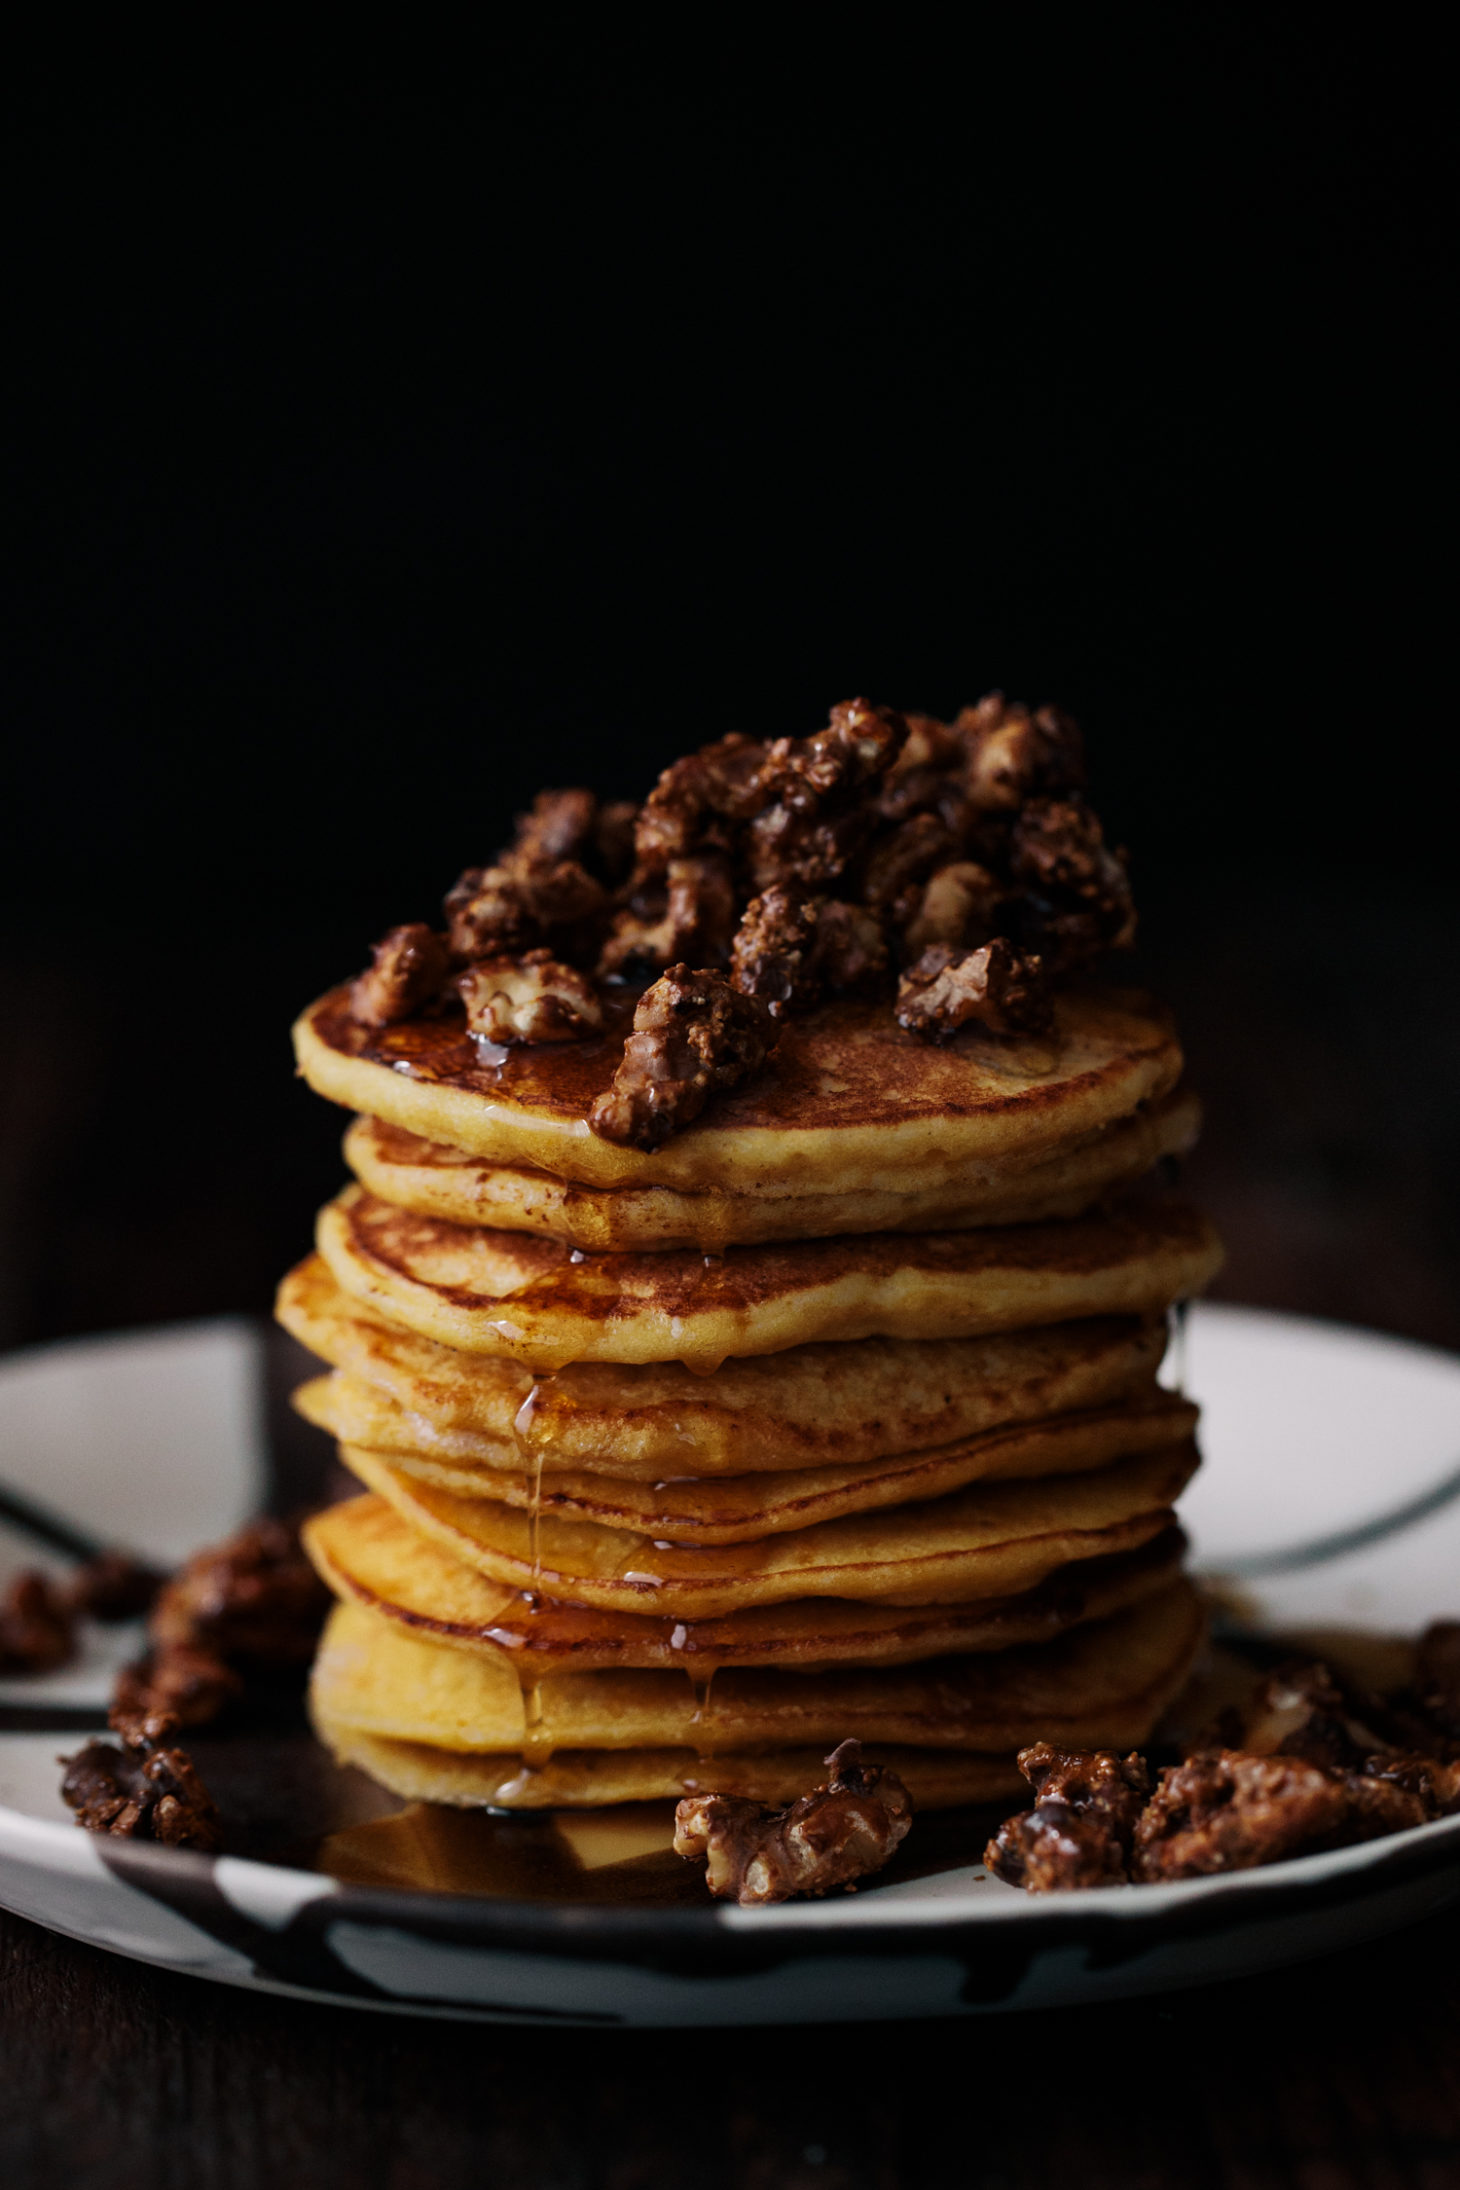 Photograph of ricotta pancakes from the side, topped with candied walnuts and maple syrup.